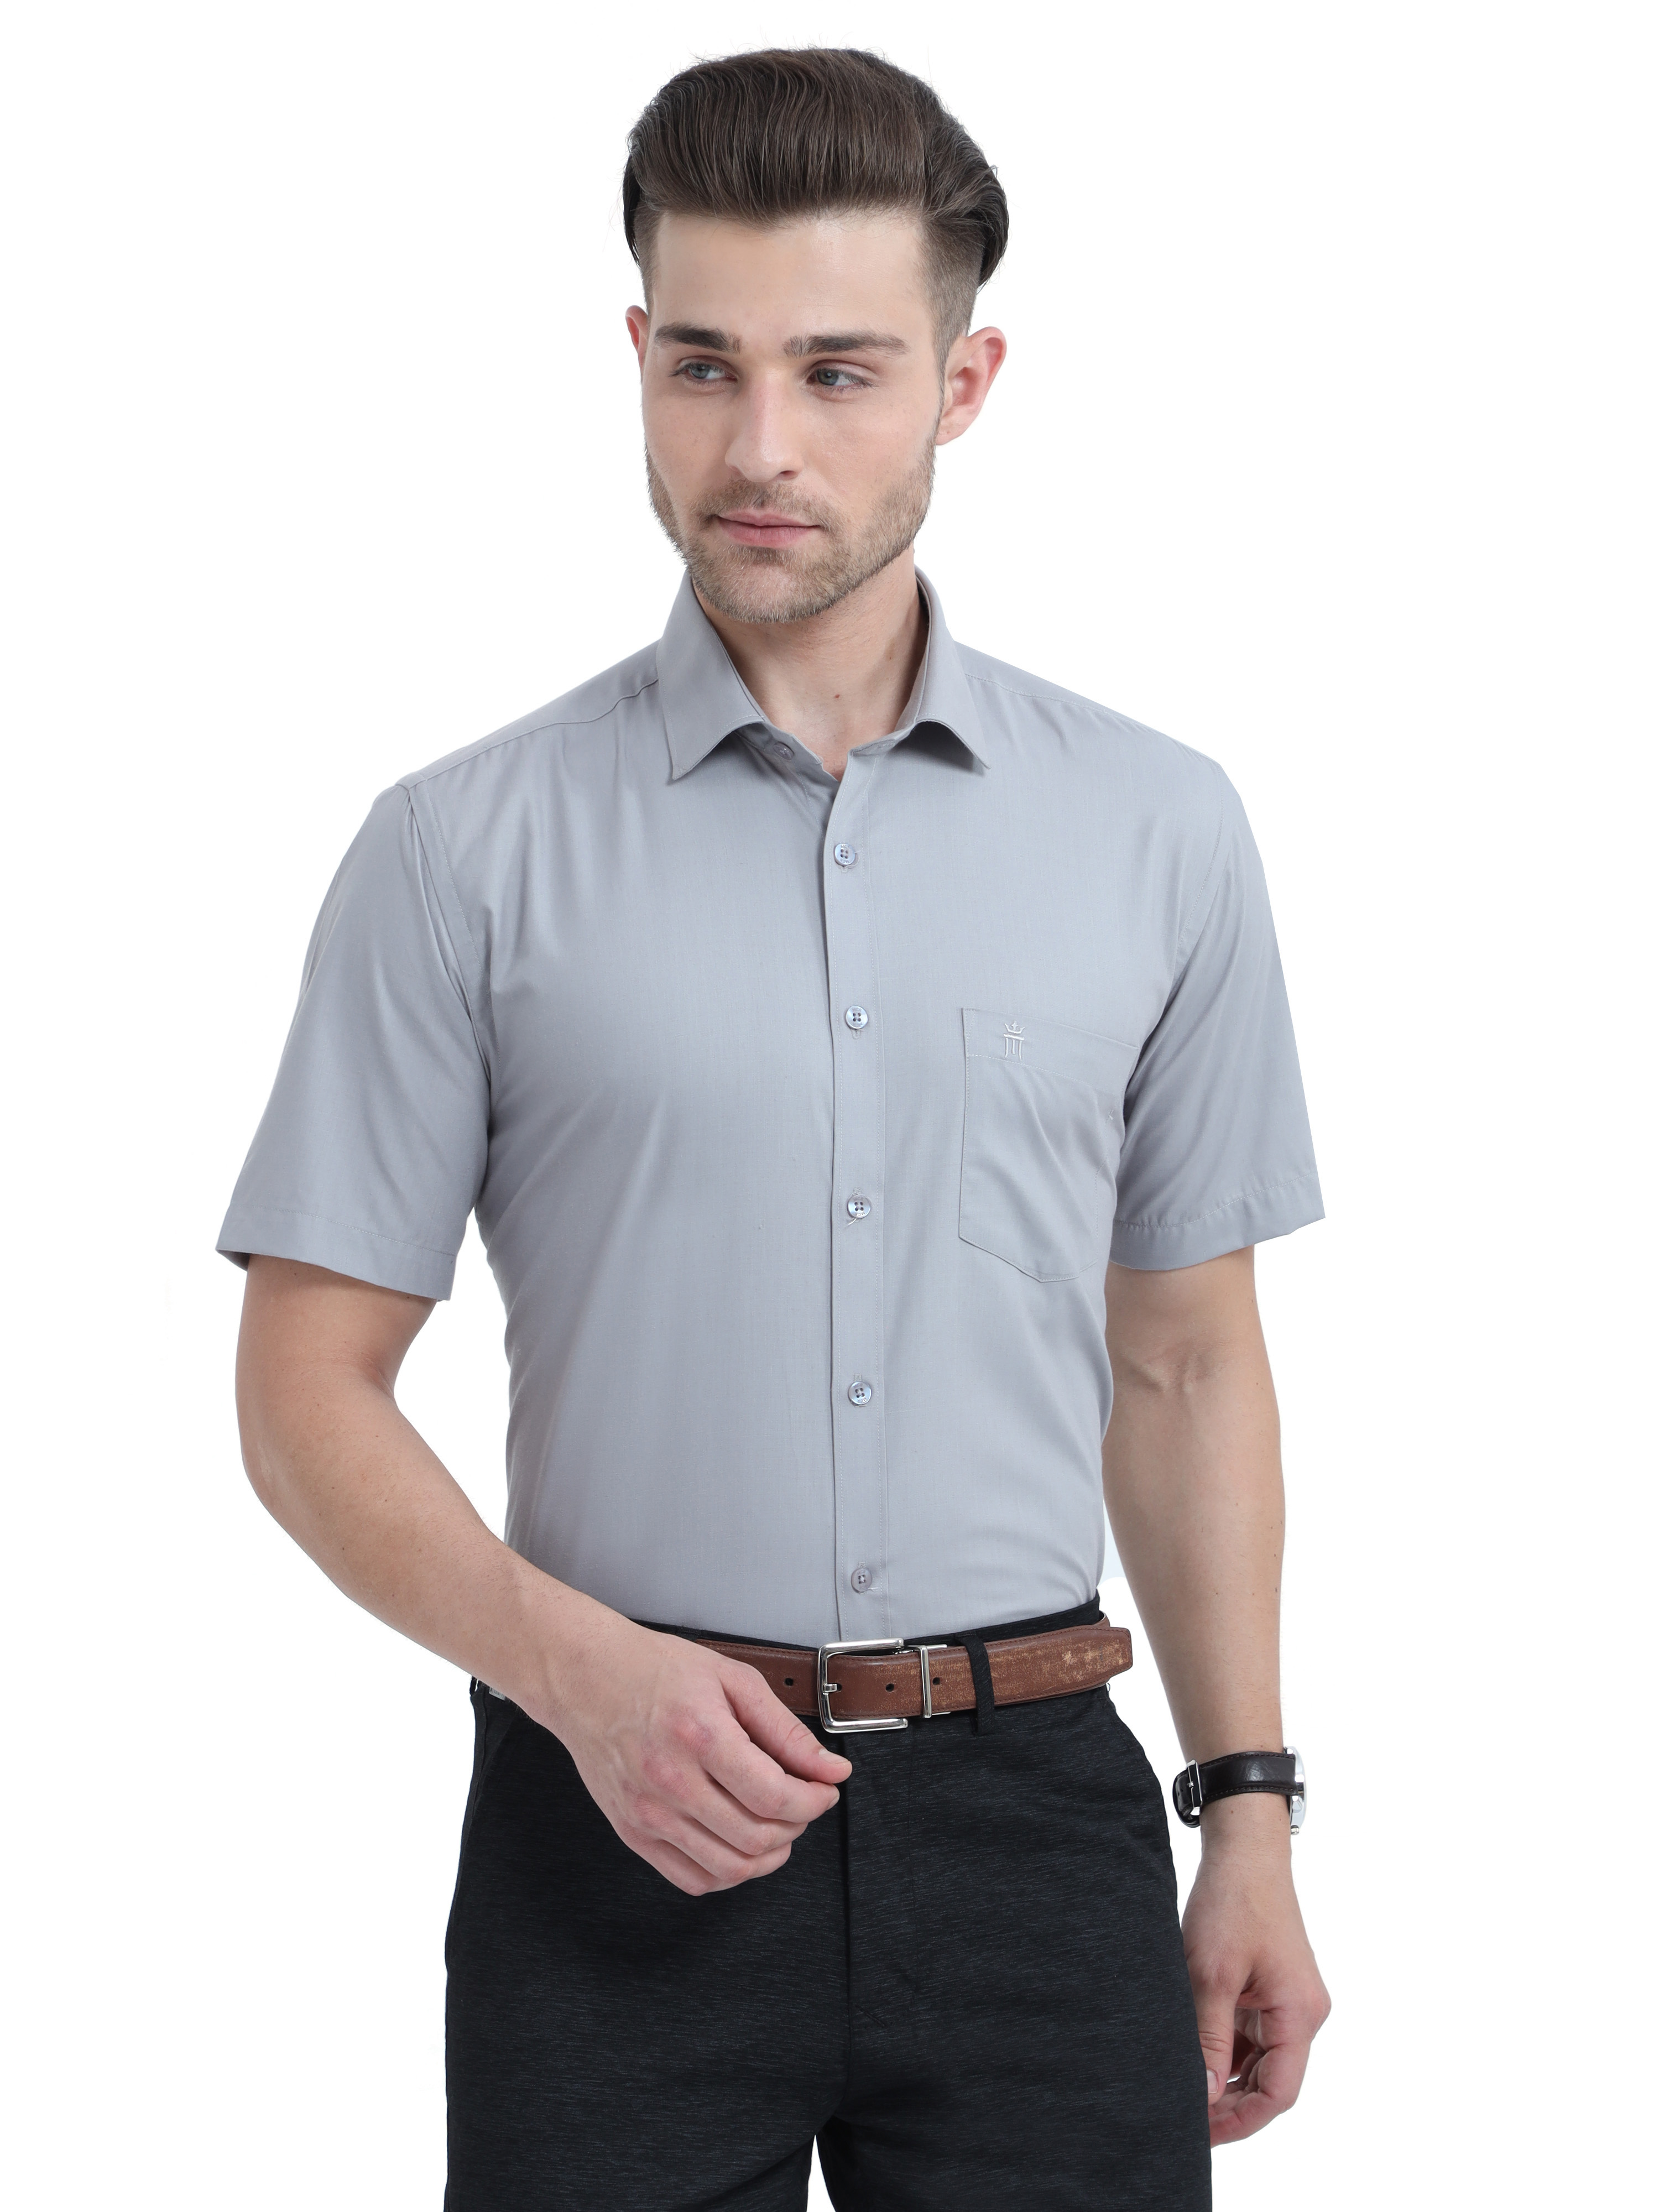 Get Stain Guard Shirt Gray Colour Half Sleeve